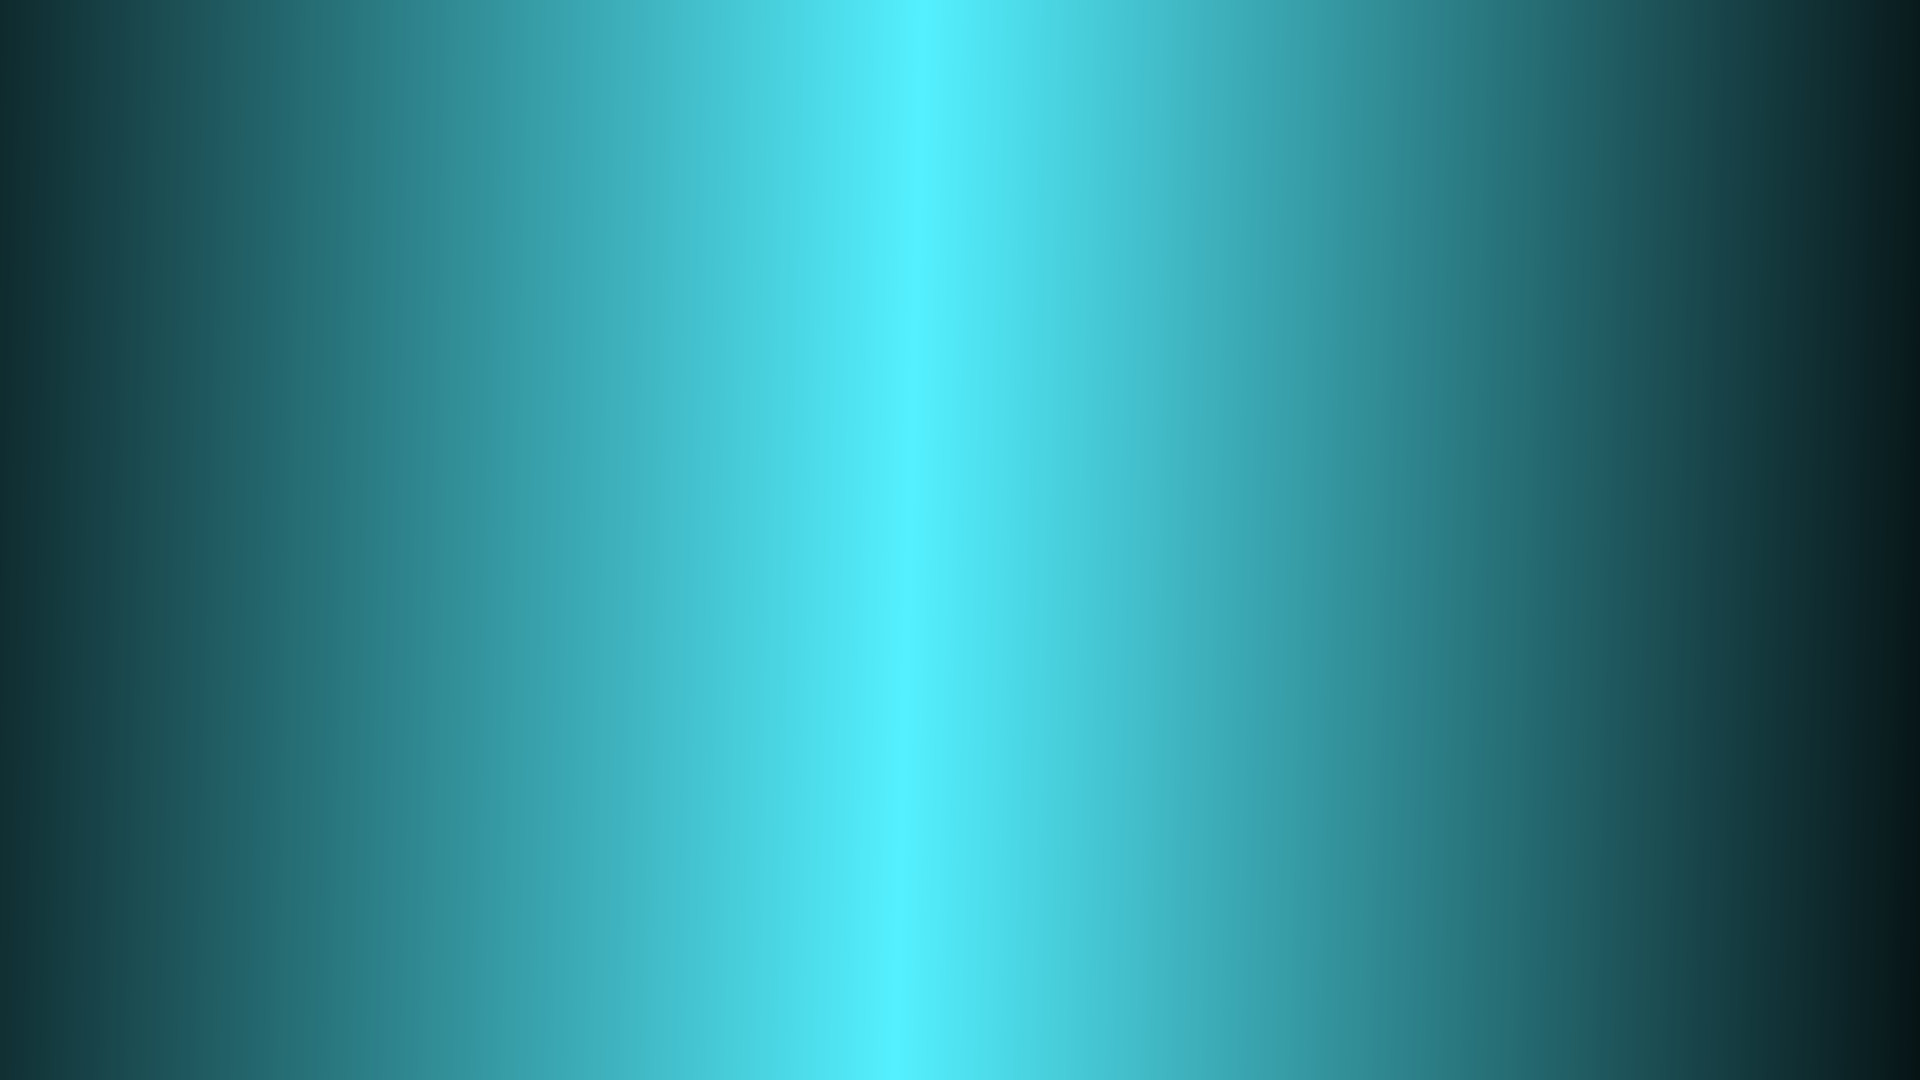 1920x1080 Sky Blue And Black Wallpaper Walldevil Best Free Hd Desktop Mobile  Wallpapers. study decorating ideas ...